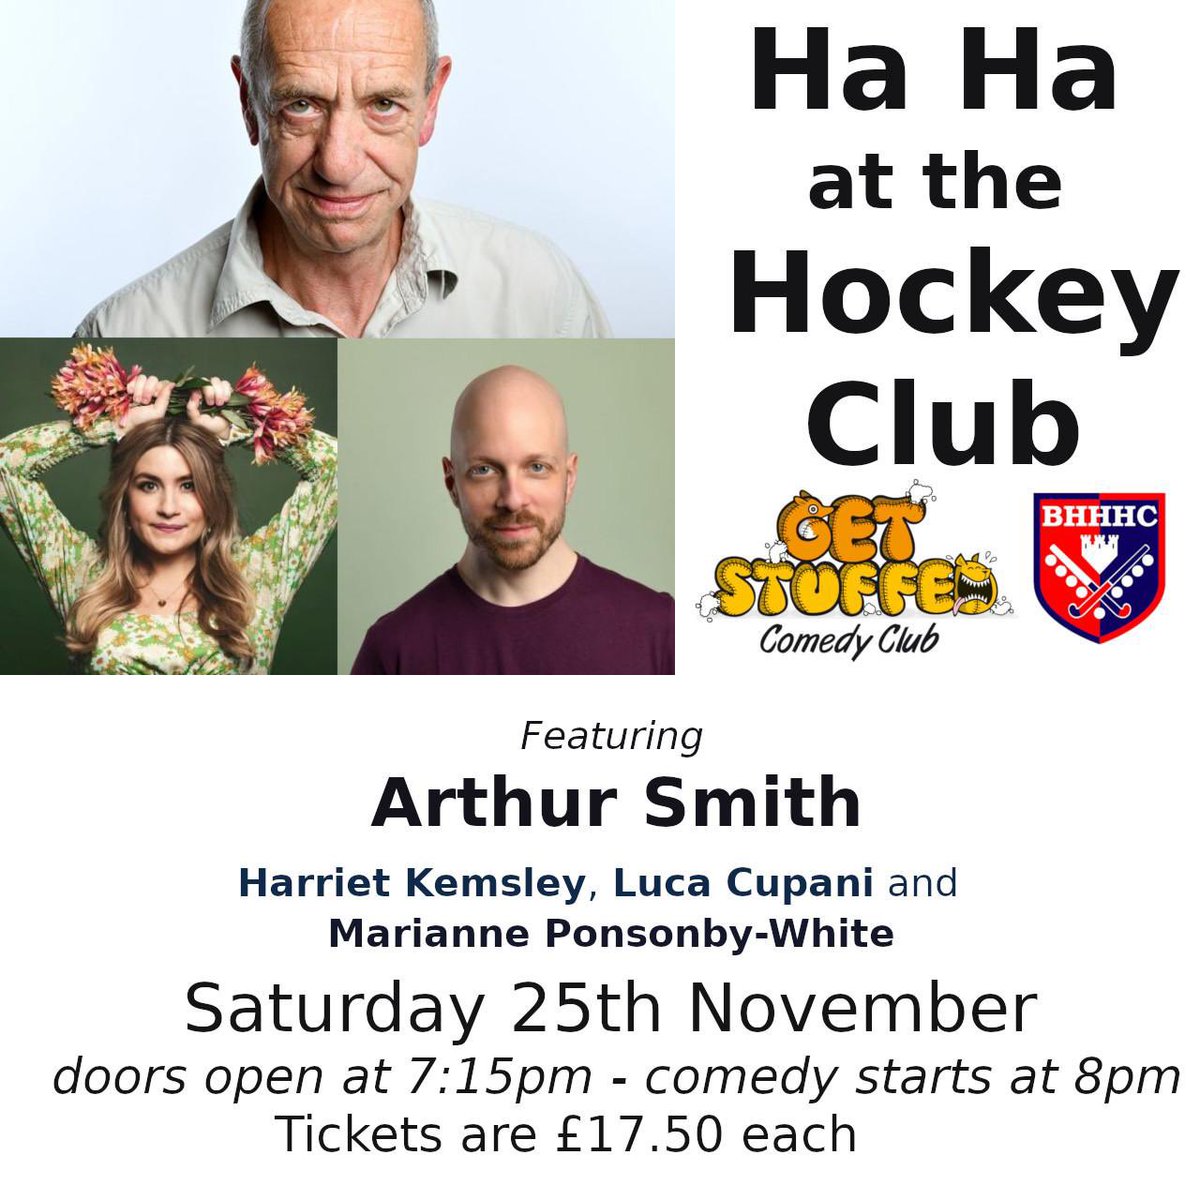 Our annual Ha Ha at the Hockey Club is coming soon, don’t miss out on tickets featuring @ArfurSmith @harrietkemsley @lucacupani @ponsonby_white #comedynight #berkohockeyclub @tringefestival